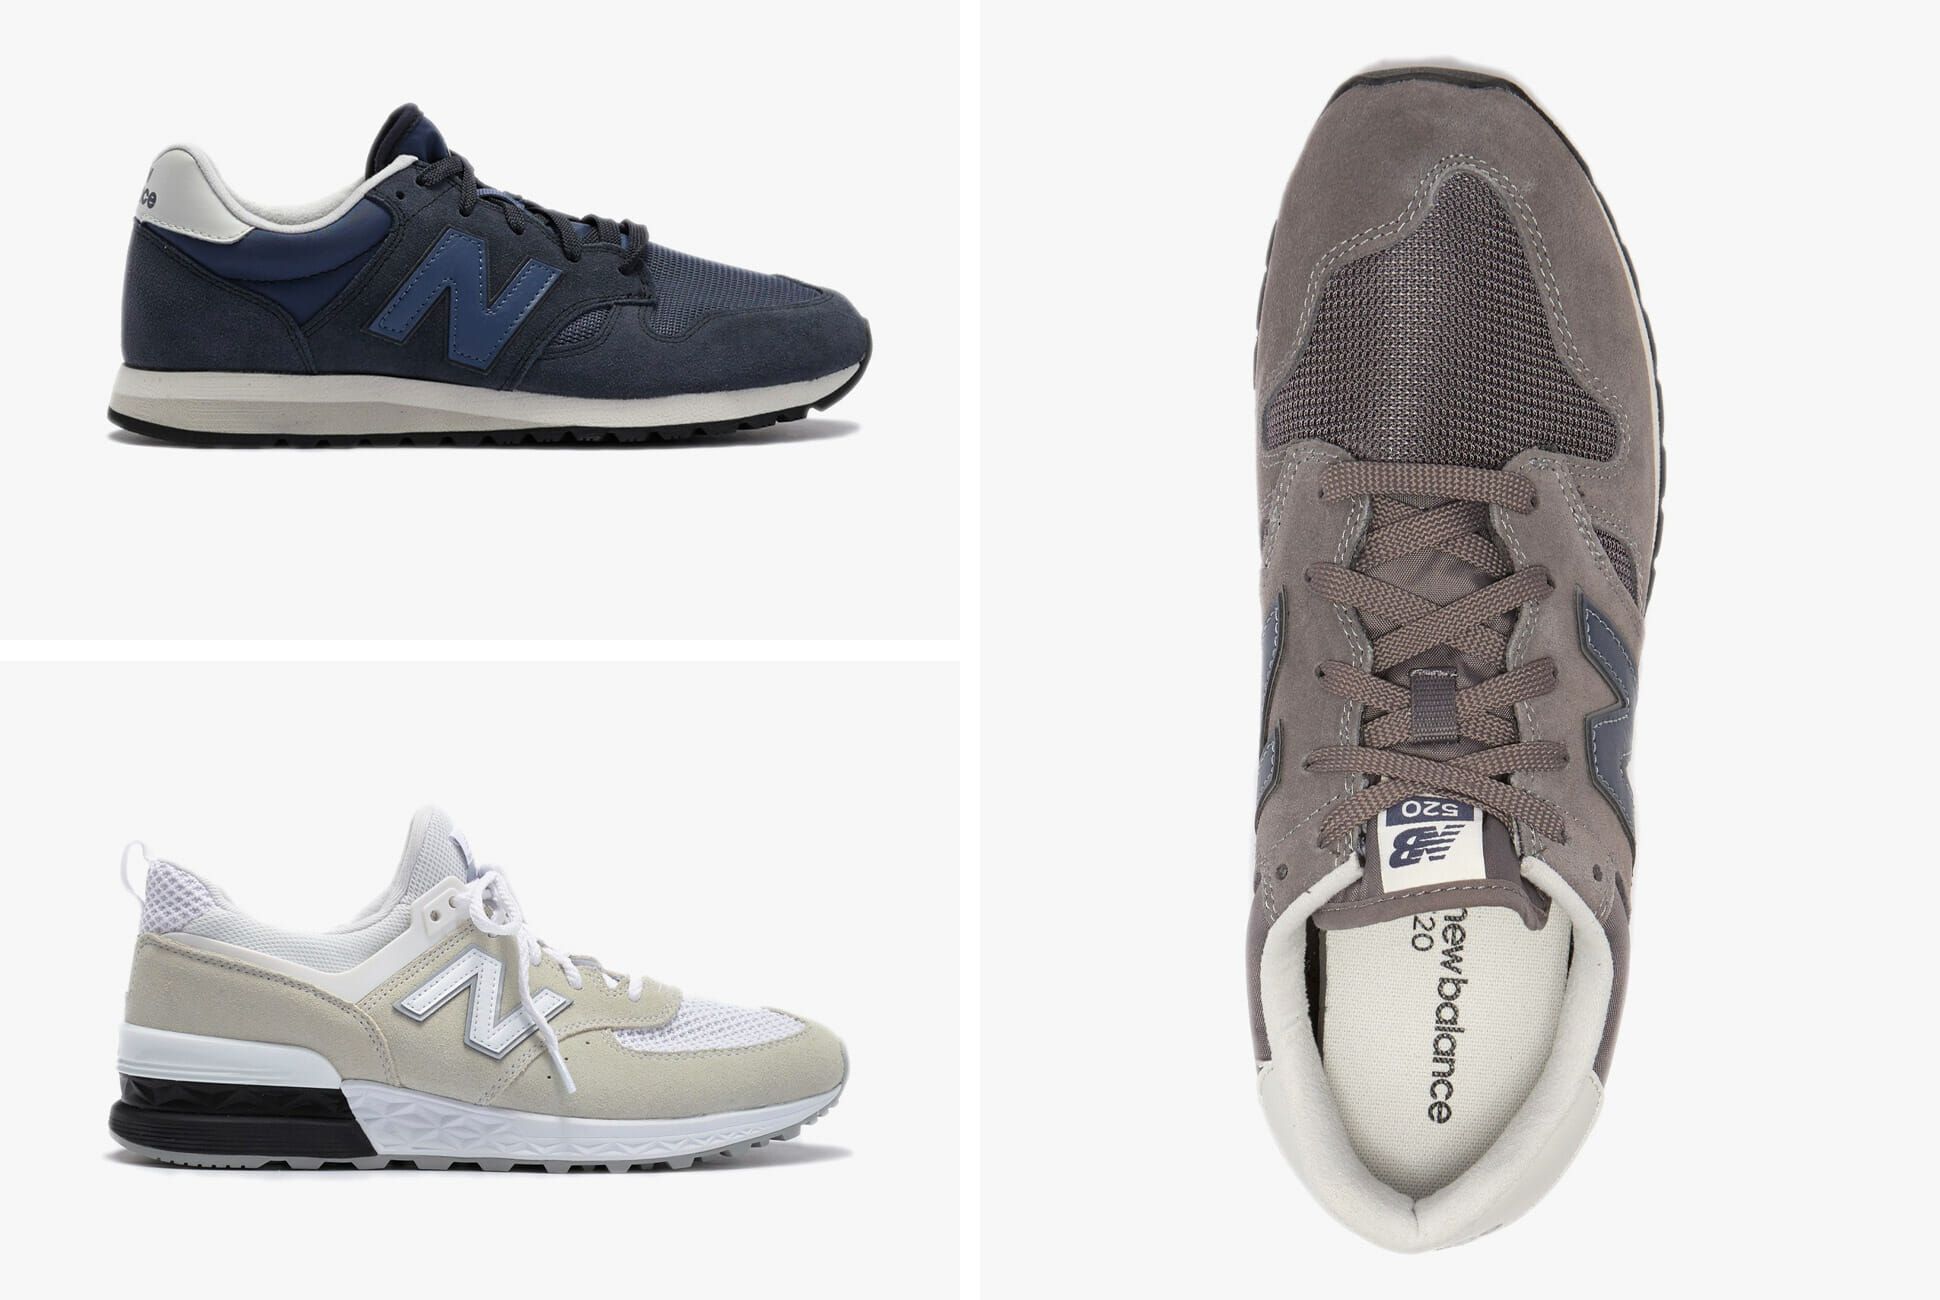 new balance sneakers sale